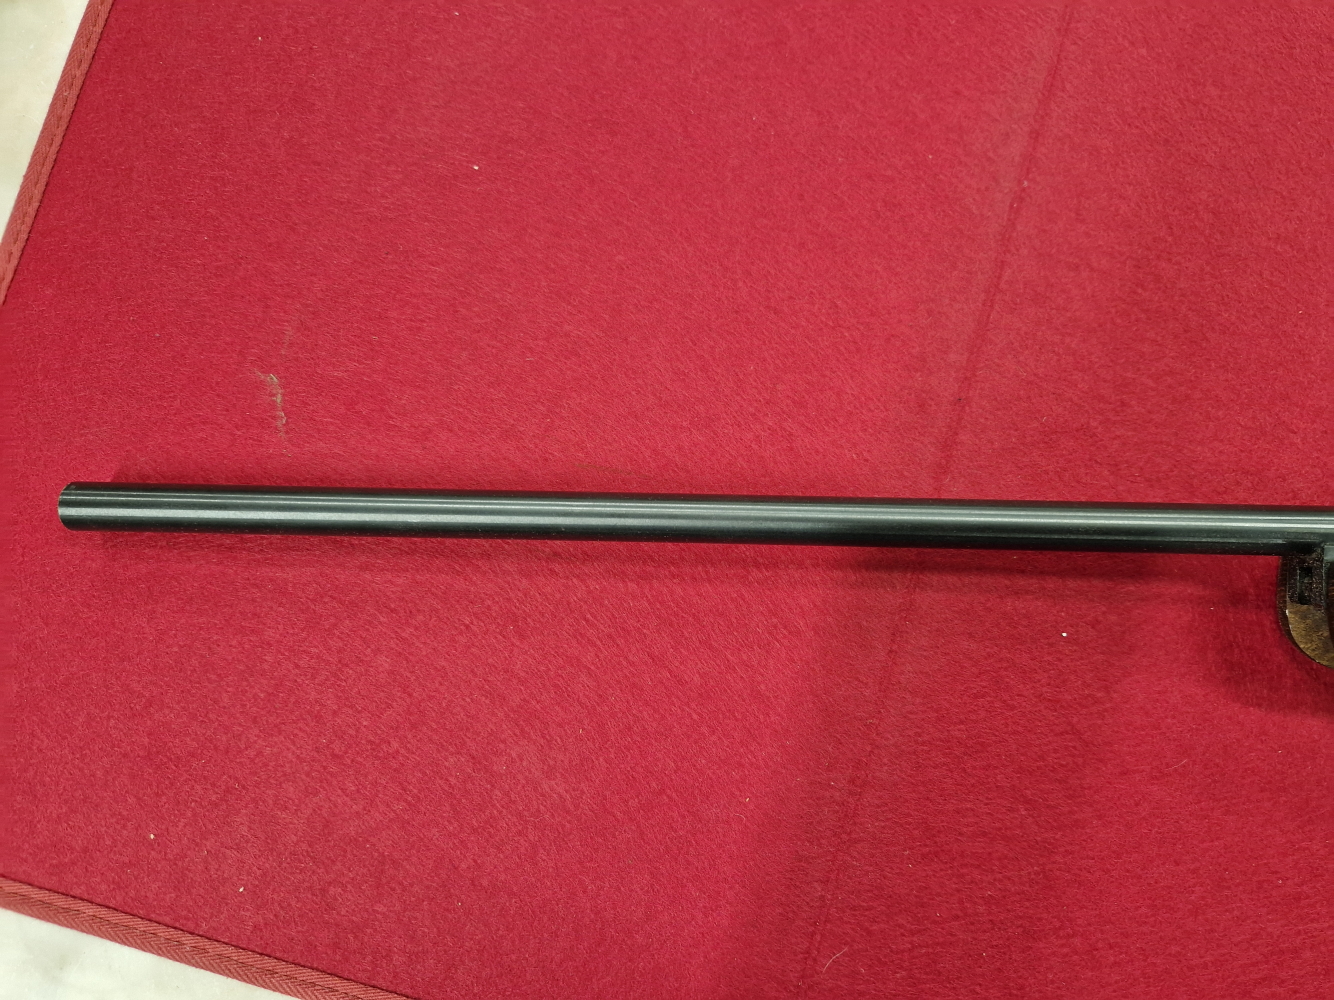 AIRGUN- A BSA LIGHTNING .22 BREAK BARREL AIR RIFLE SERIAL NUMBER 861121. FITTED WITH A HAWK 4 X 32 - Image 4 of 9